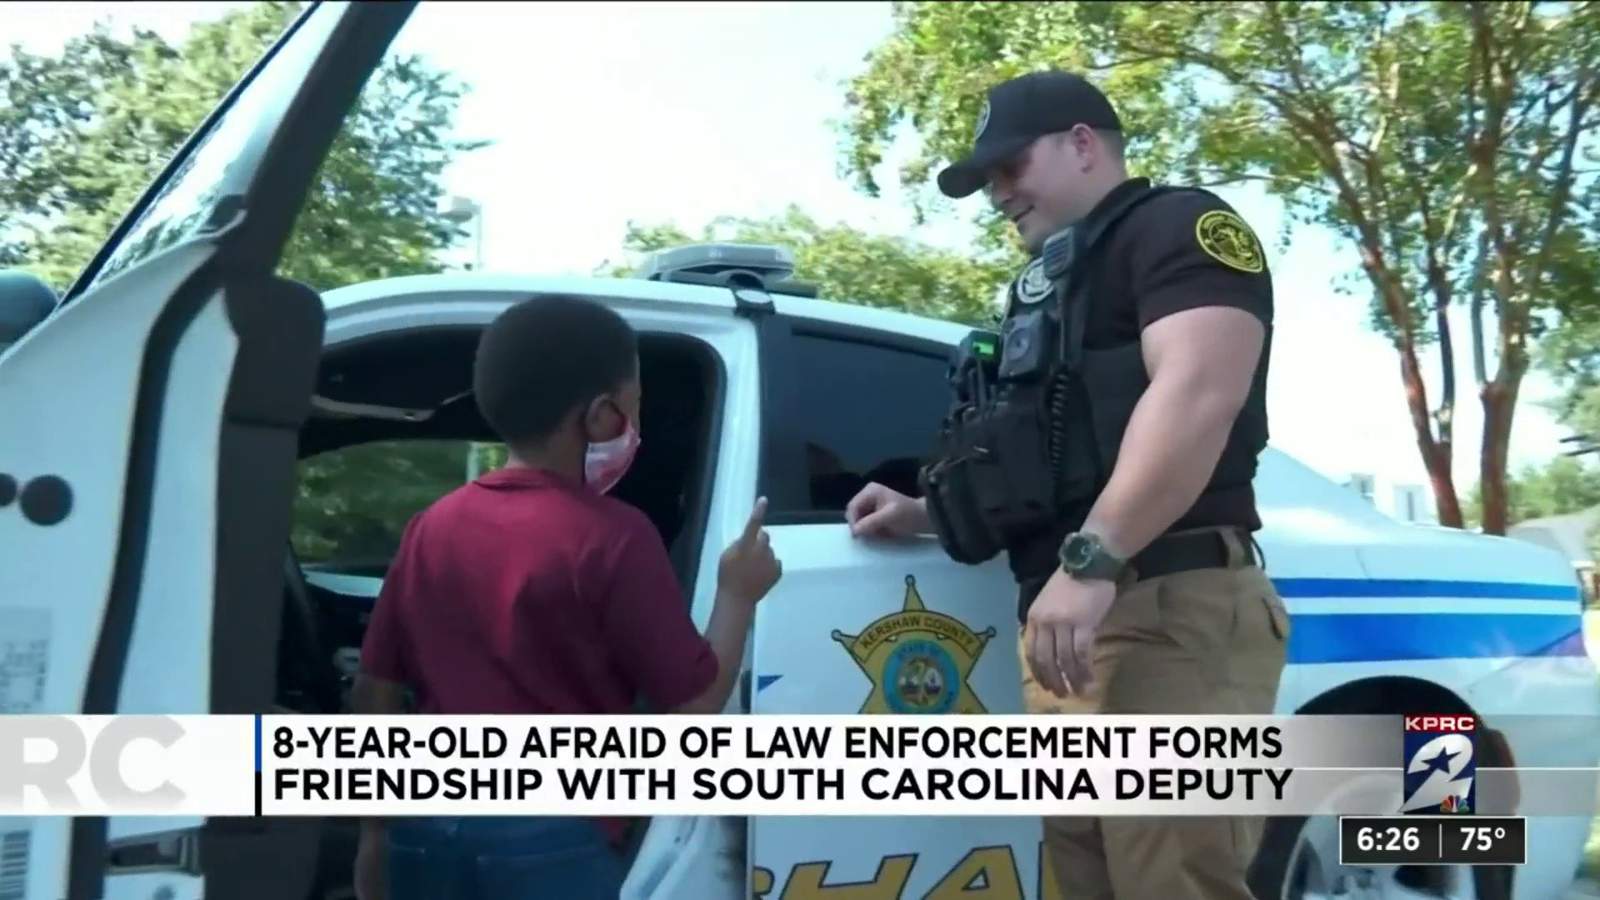 One Good Thing: 8-year-old afraid of law enforcement forms friendship with South Carolina deputy